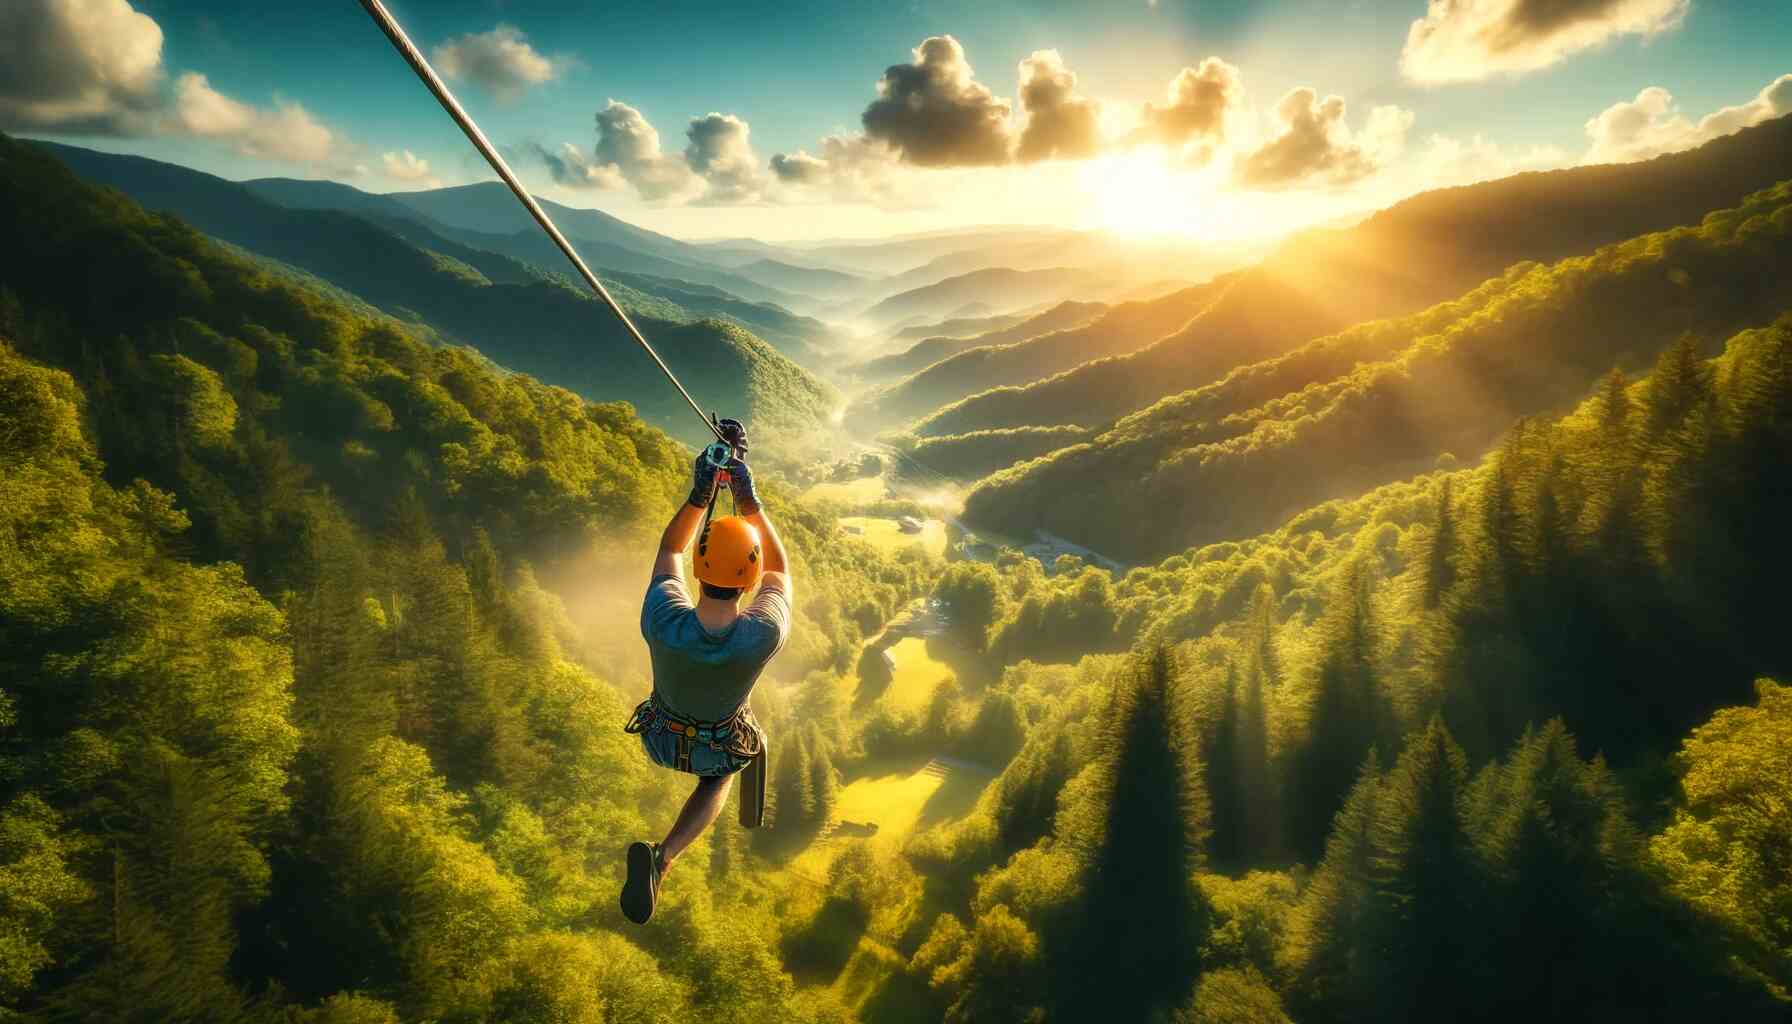 A person ziplining in the Smoky Mountains, surrounded by lush green forests and a stunning mountain backdrop under a clear, sunny sky. The person is wearing safety gear, including a helmet and harness, and is smiling, showcasing the excitement and thrill of the adventure.